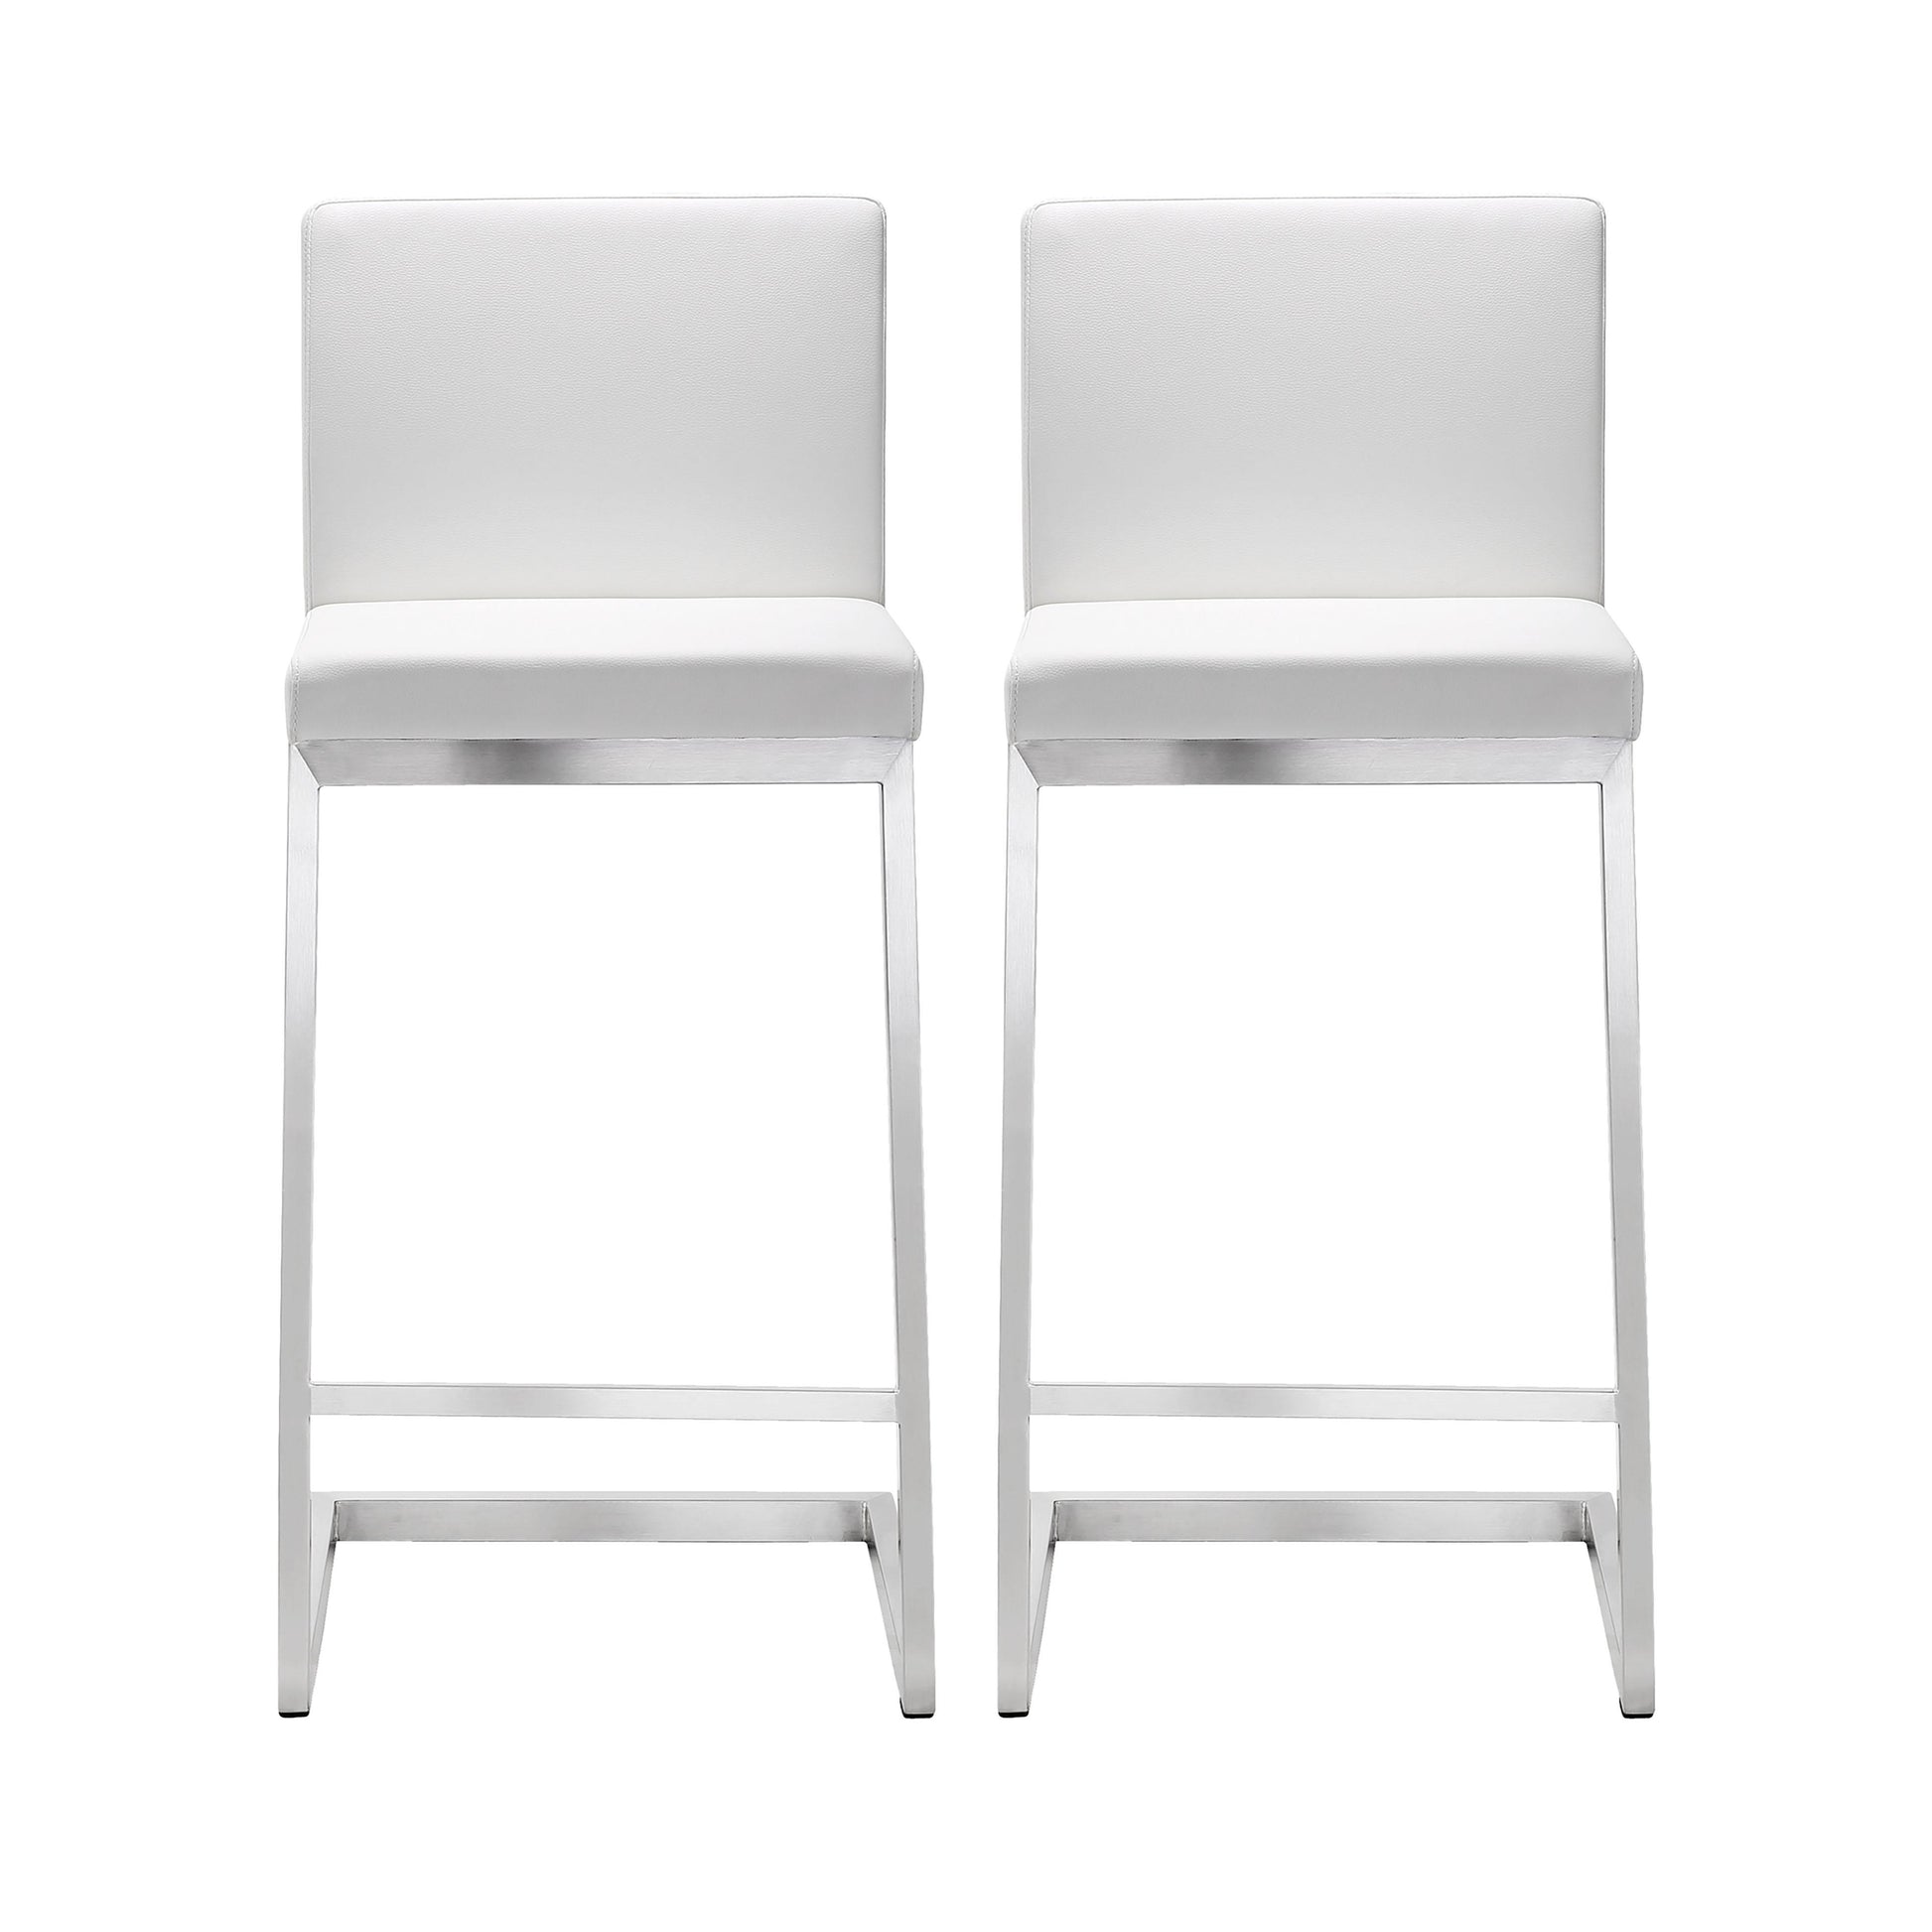 Tov Furniture Parma White Stainless Steel Counter Stool Set of 2